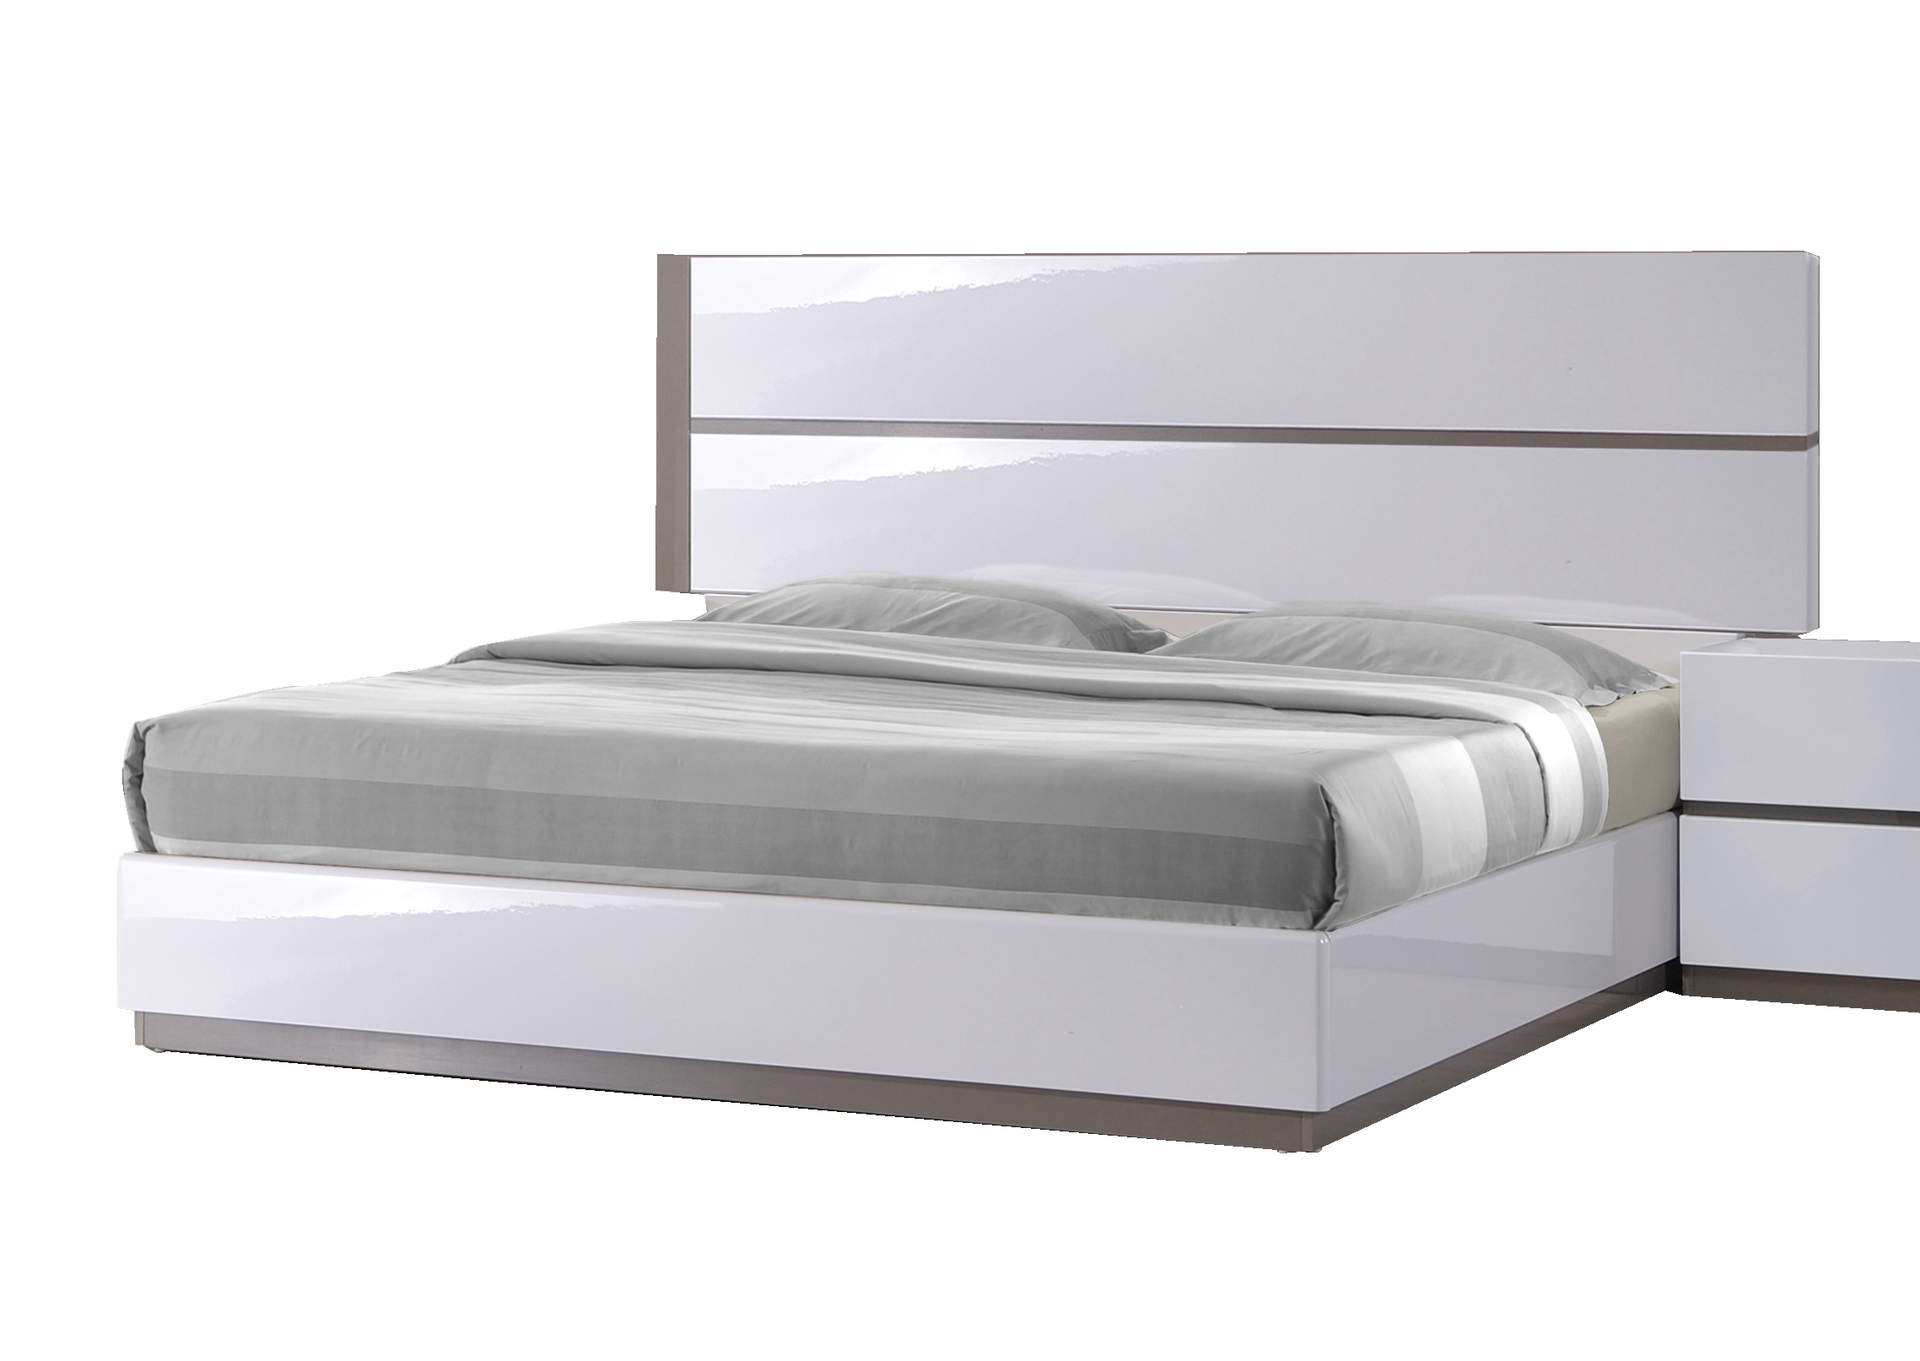 Modern 2-Tone King Size Bed,Chintaly Imports